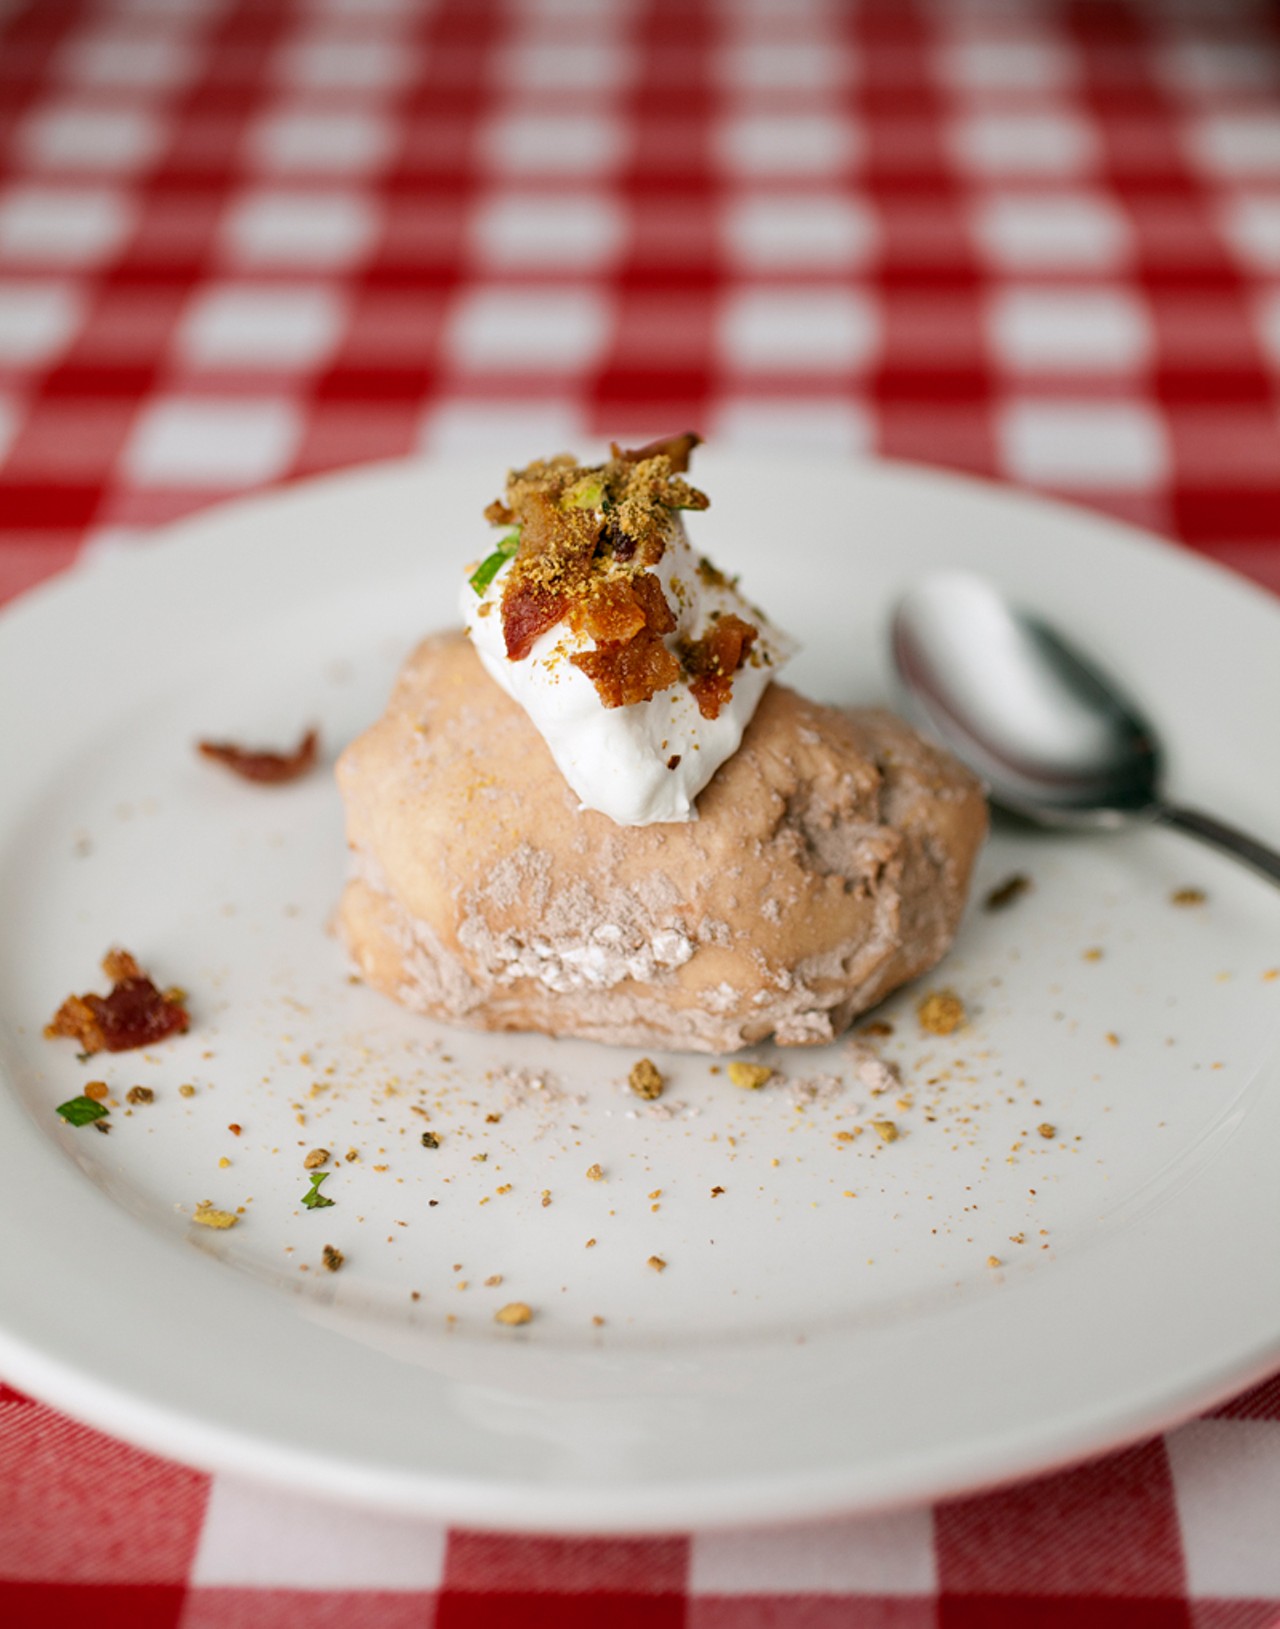 One of the selections on the dessert -- or "Afterthoughts" -- menu: The Baked Potato.
The Baked Potato is vanilla bean ice cream formed to look like a potato, dusted with powdered sugar and cocoa powder. It is then topped with whipped cream, toasted pistachioes and bacon.